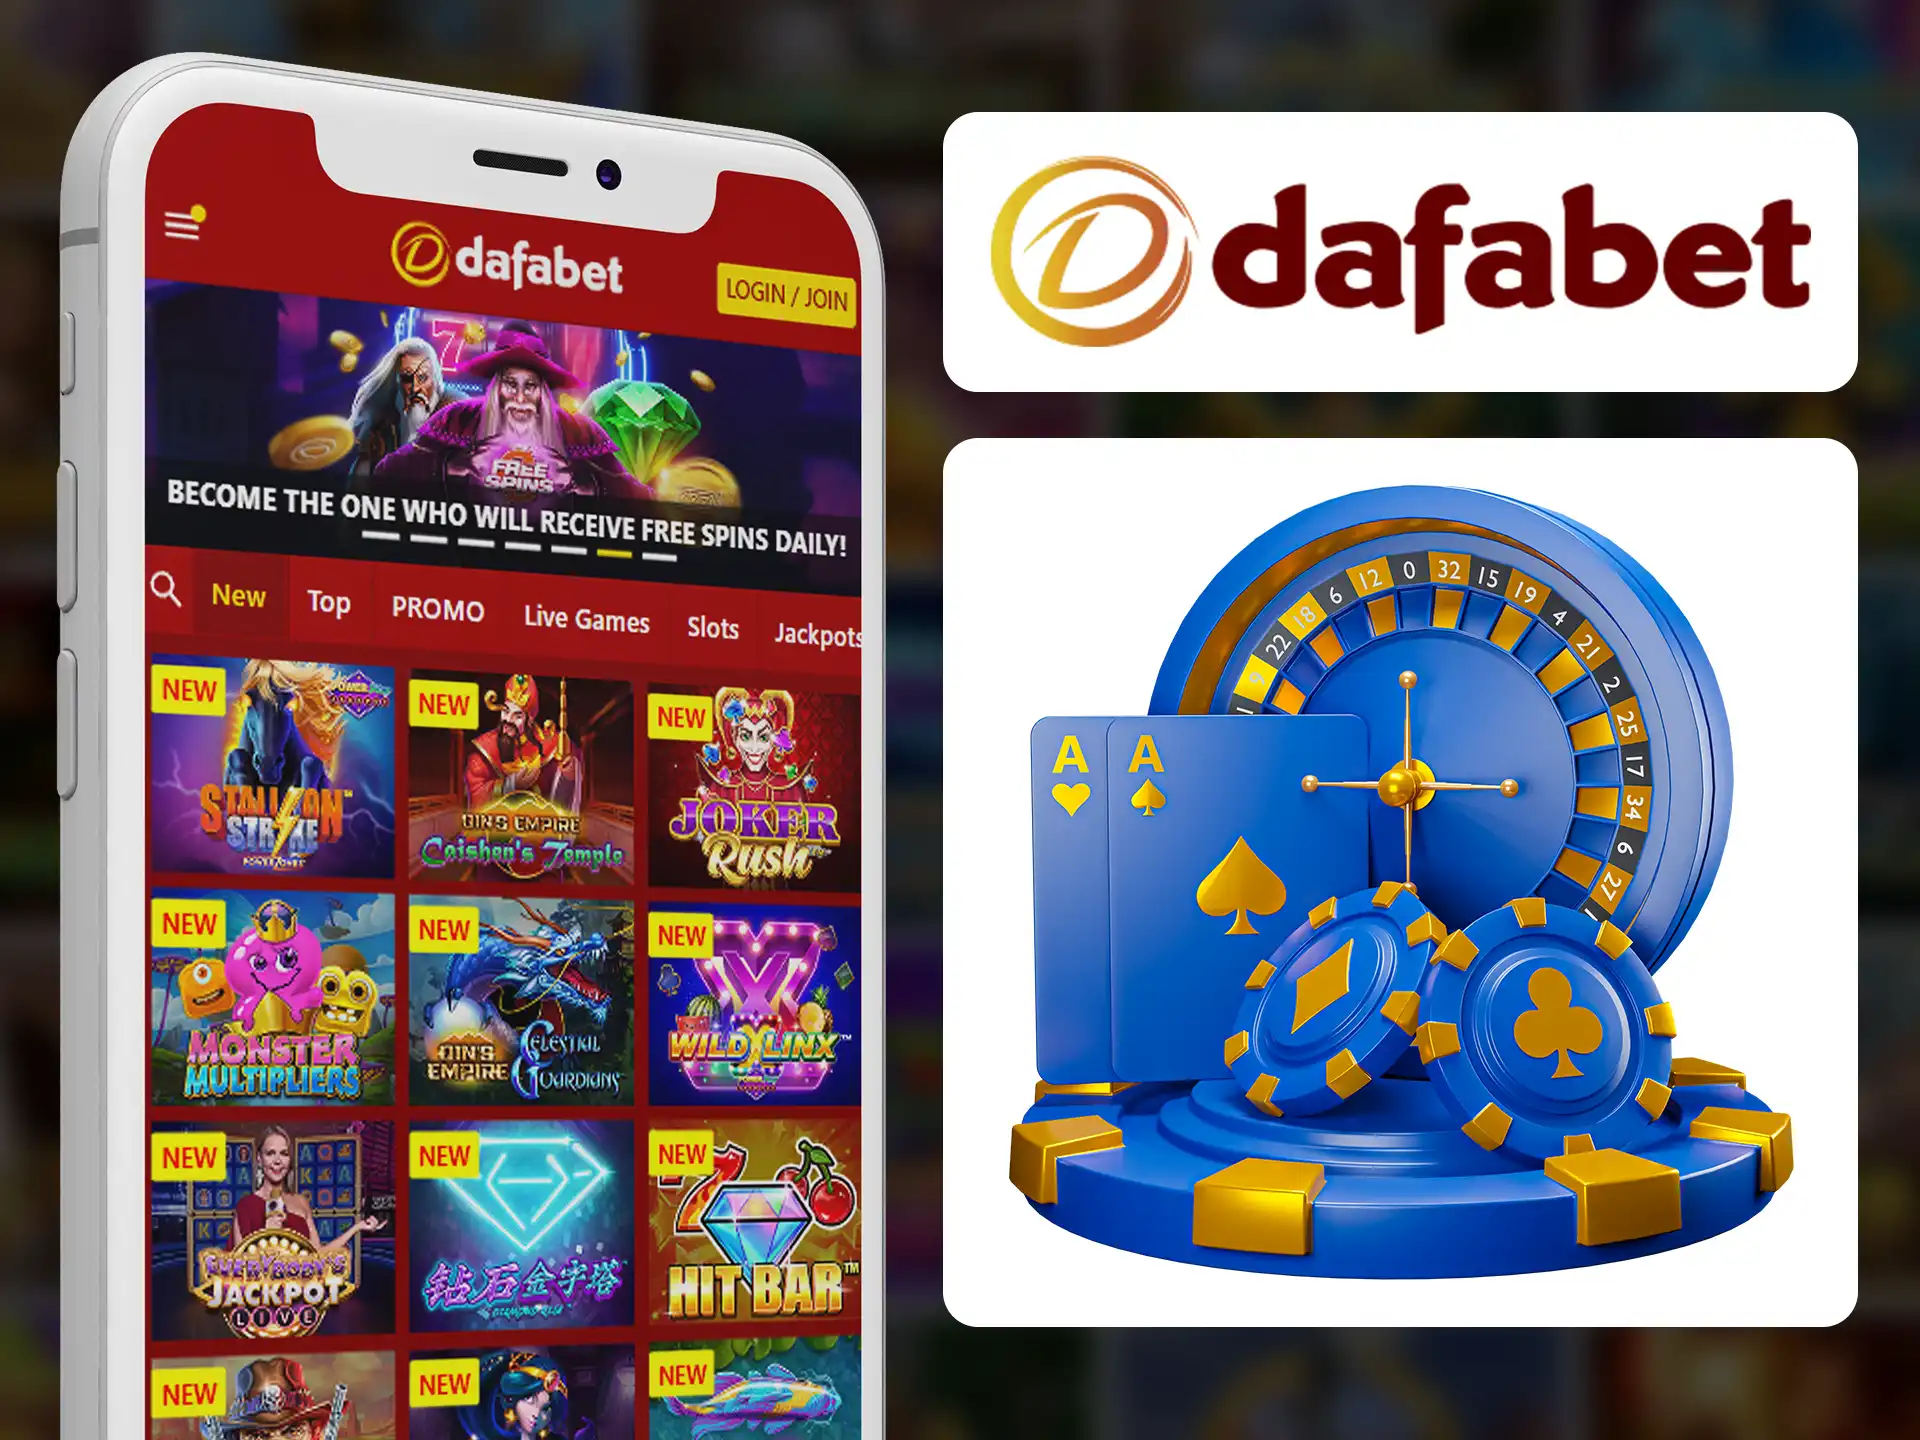 Check for new and favourite player casino games in Dafabet app.